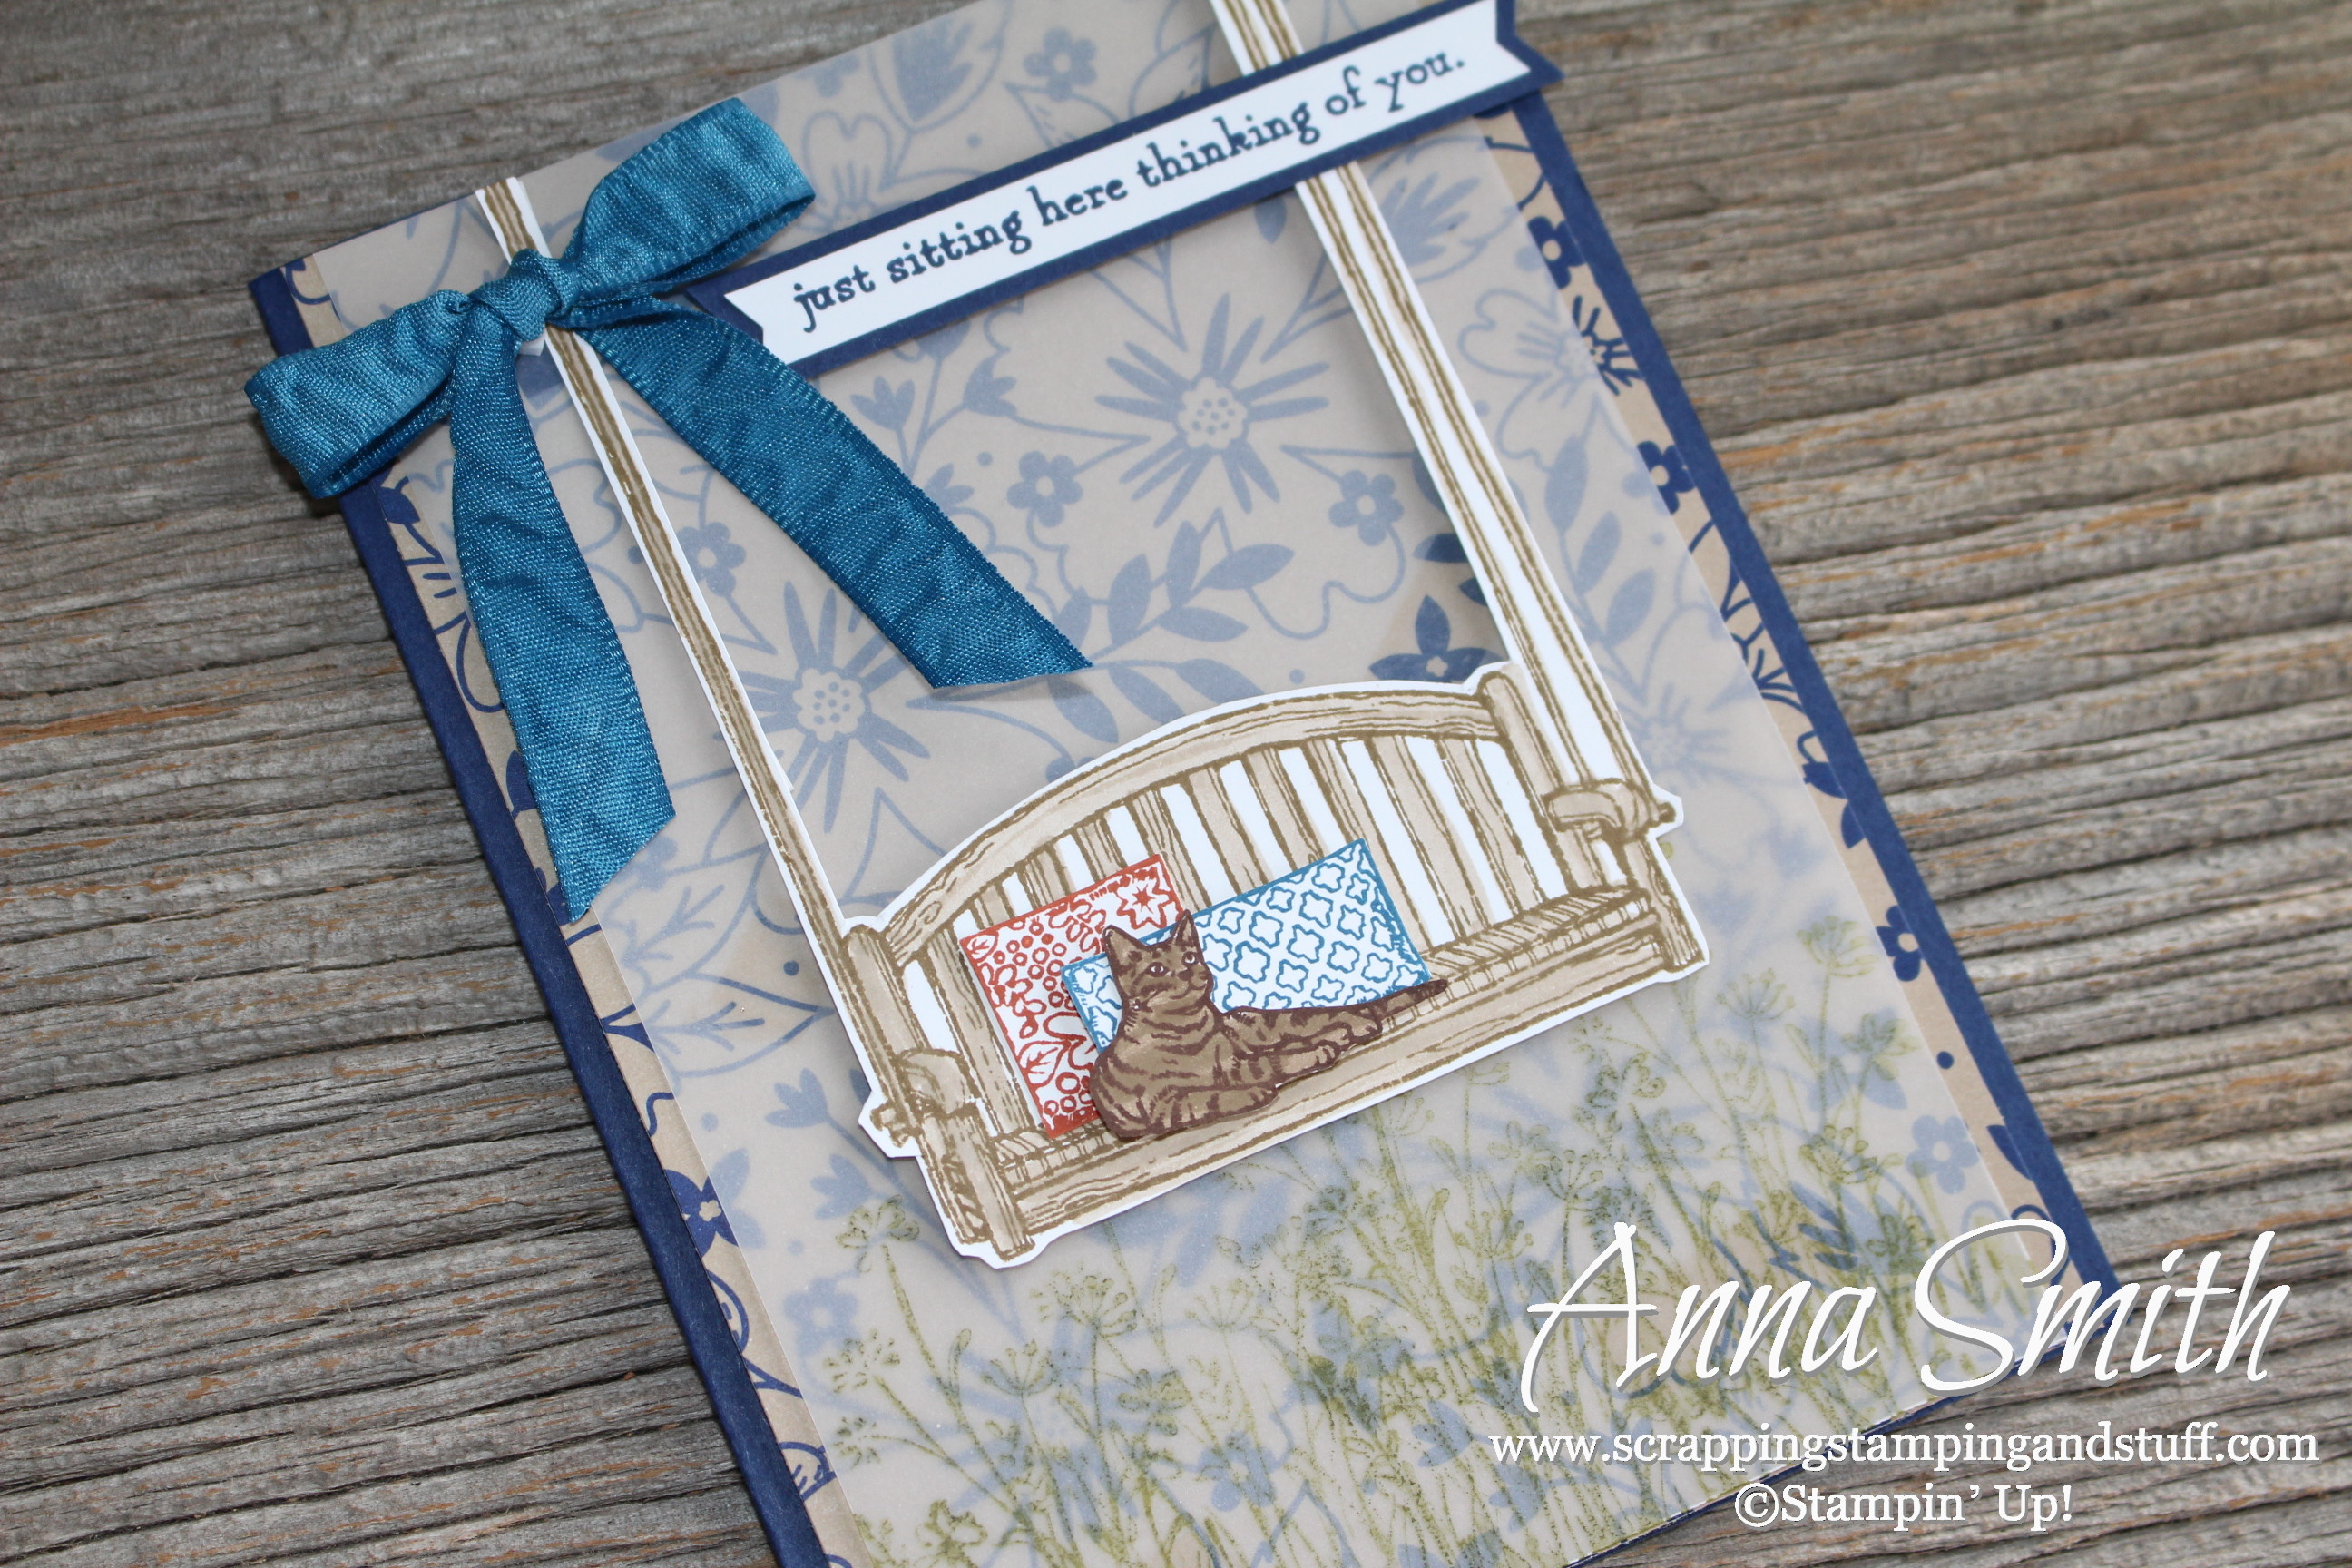 Adorable porch swing and kitty cat card using the Stampin' Up! Sitting Here stamp set and Affectionately Yours designer paper